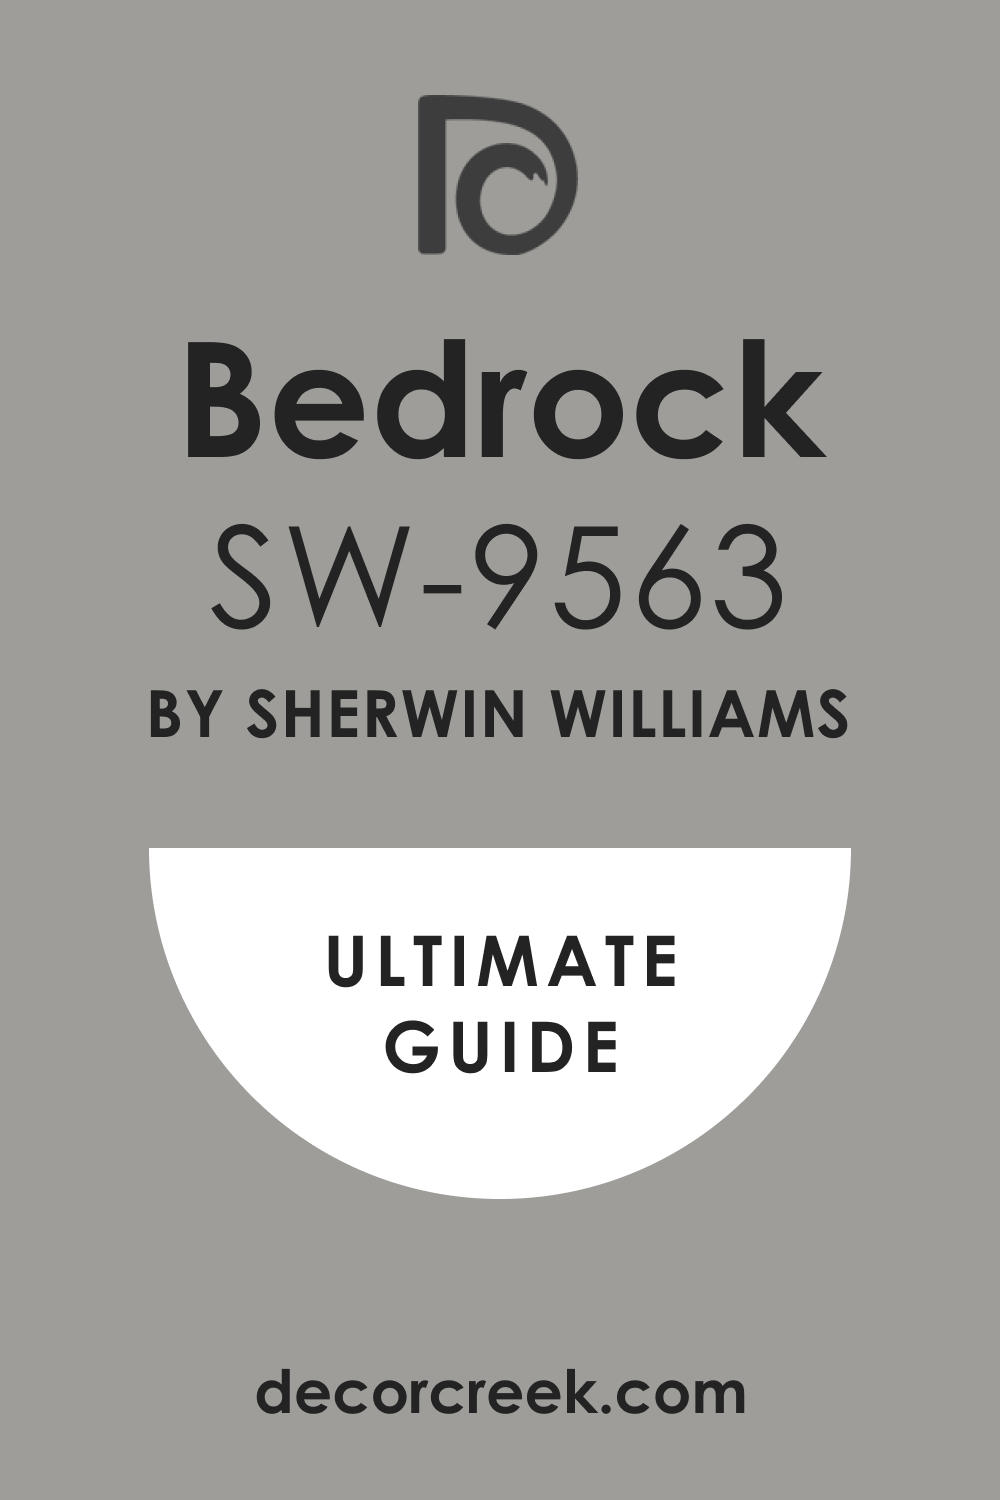 Ultimate Guide. Bedrock SW 9563 Paint Color by Sherwin-Williams